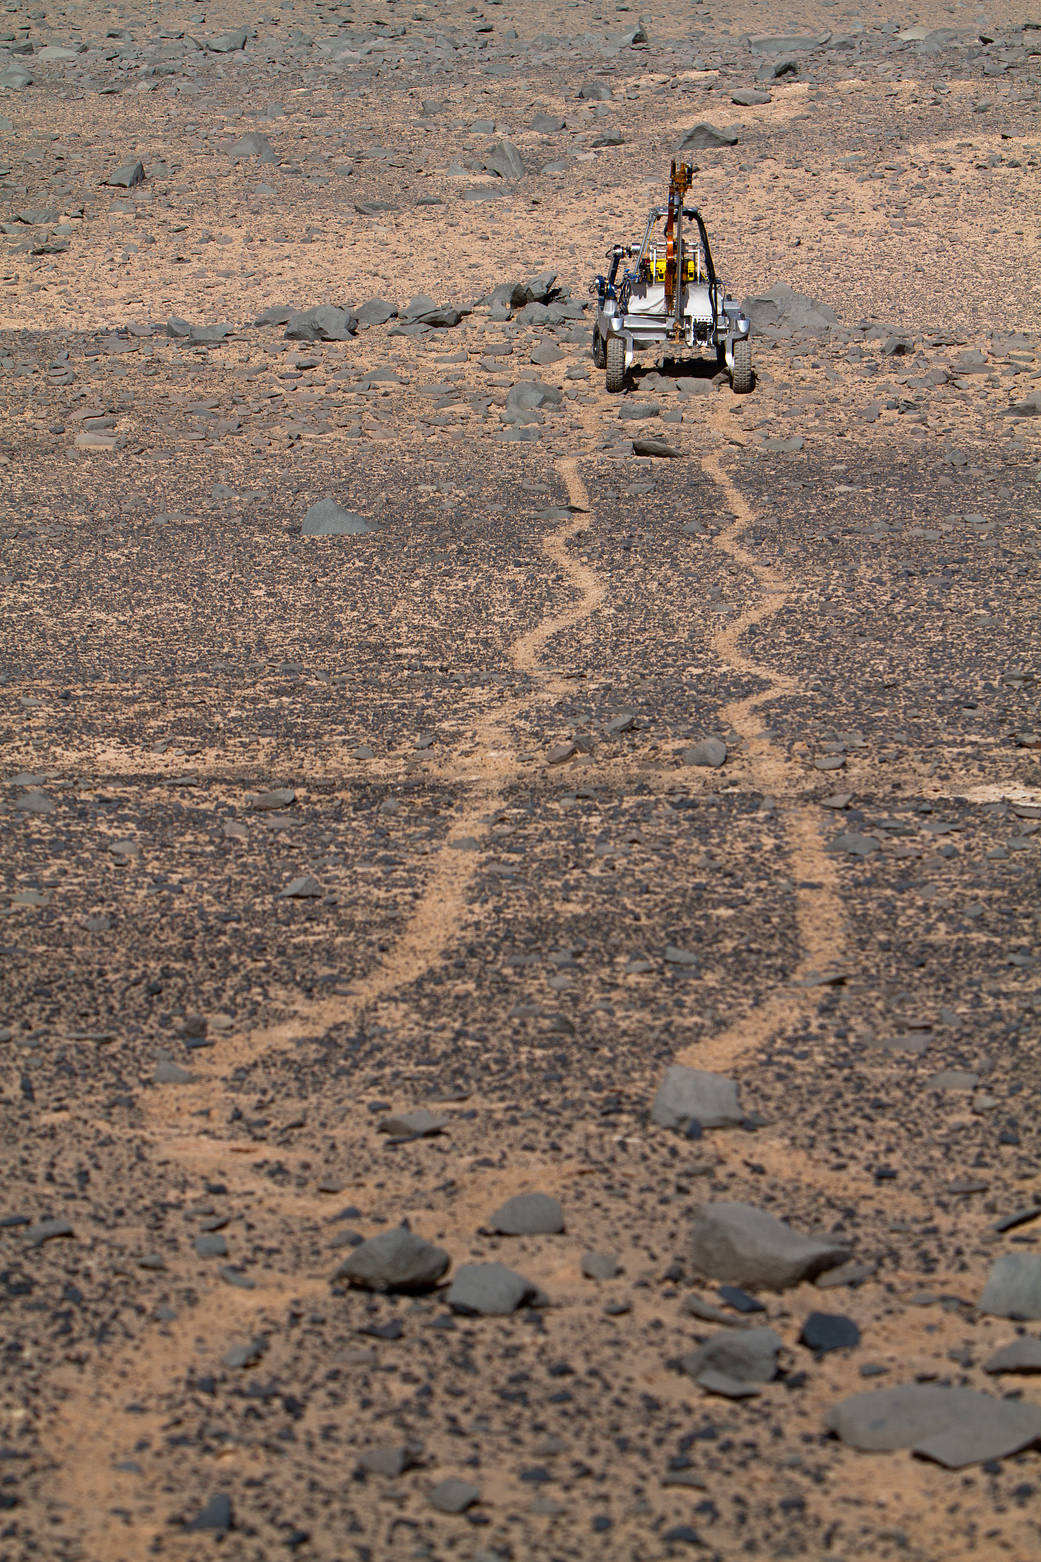 The ARADS rover venturing off in the Atacama Desert, leaving tracks in the sand behind it.